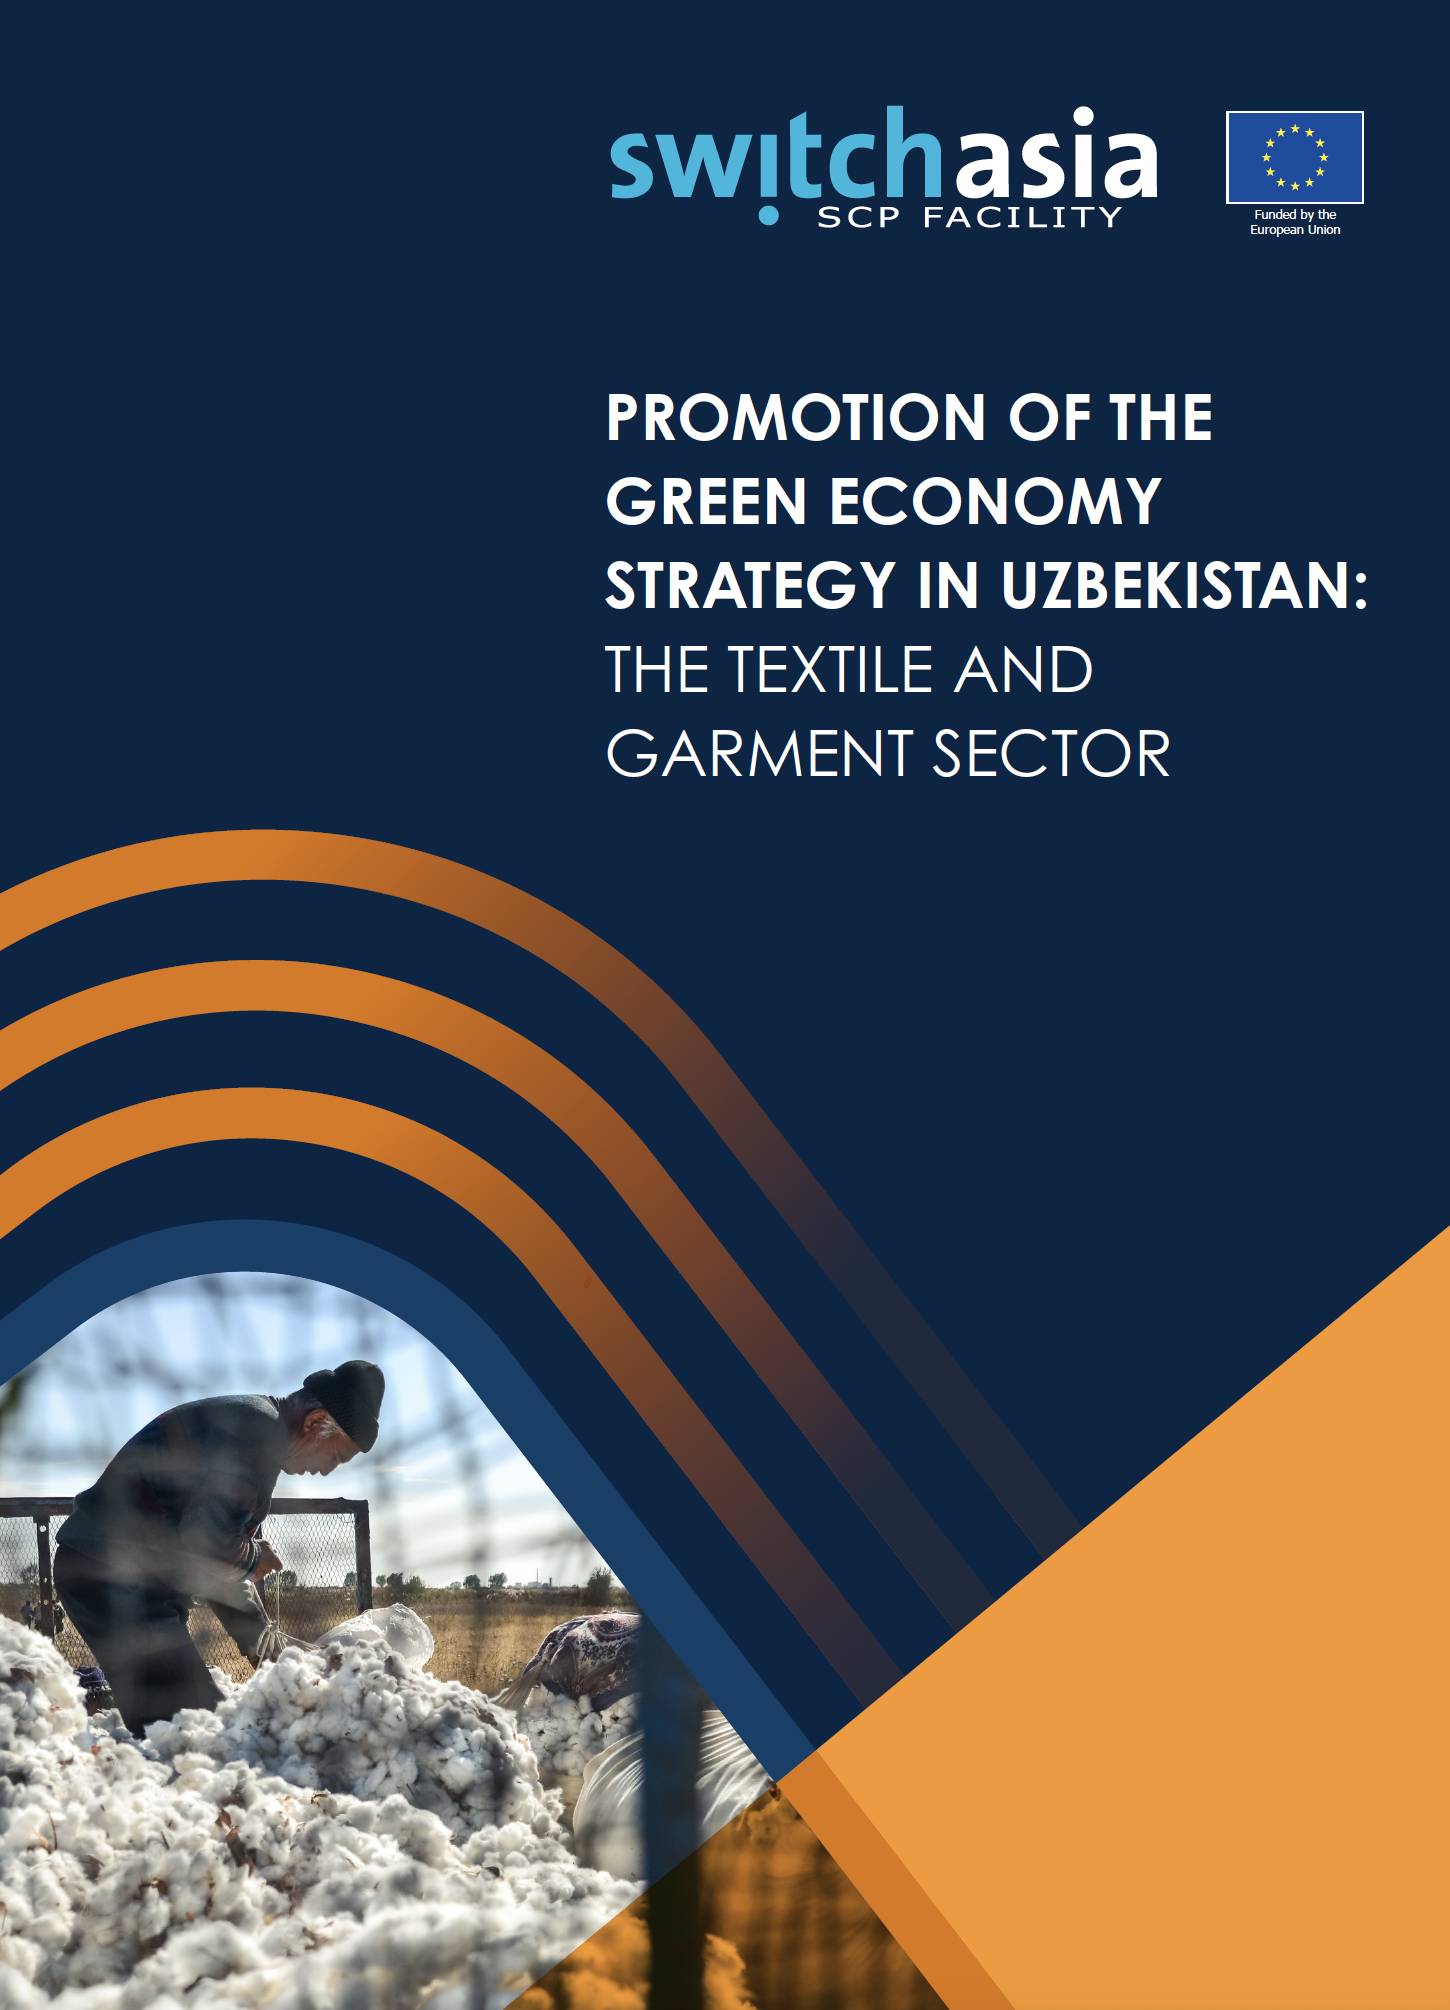 Promotion of the Green Economy Strategy in Uzbekistan: The Textile and Garment Sector